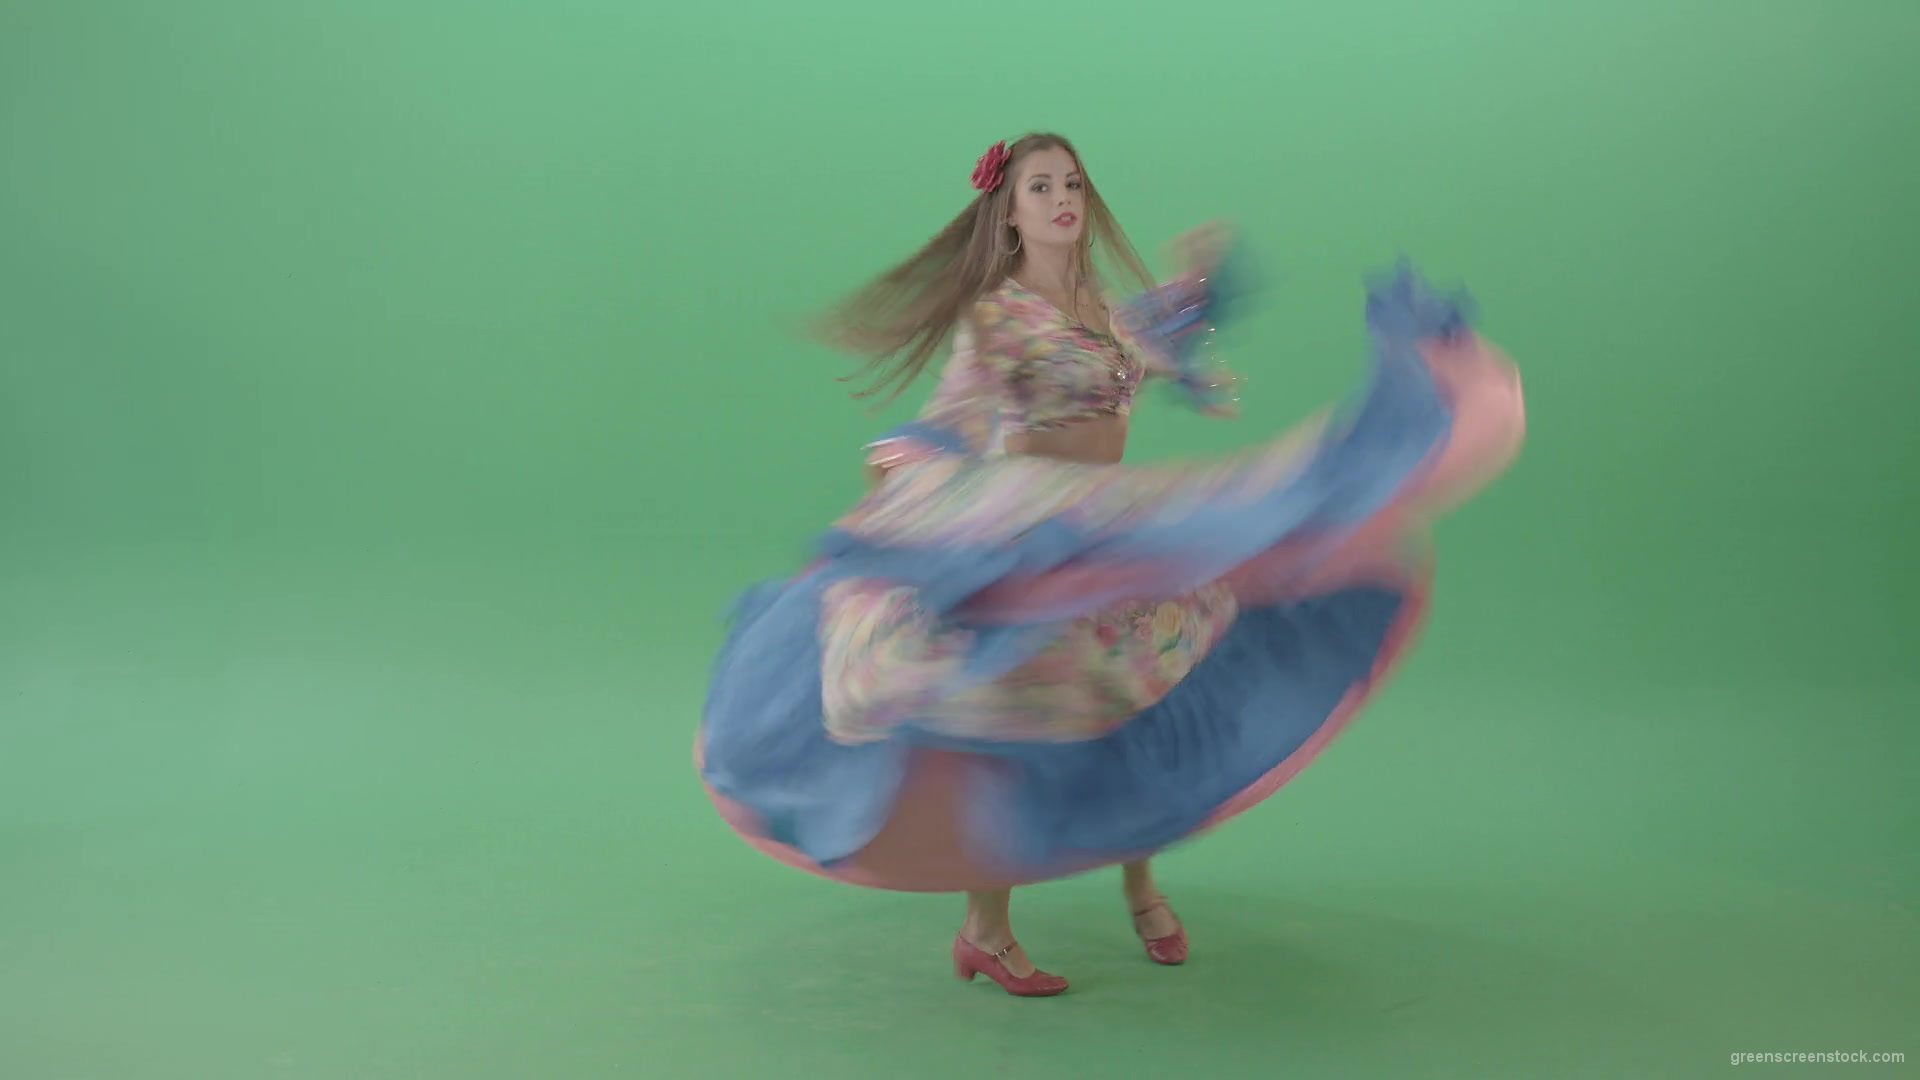 Balkan-Gipsy-Girl-spinning-and-dance-isolated-on-Green-Screen-4K-Video-Footage-1920_006 Green Screen Stock